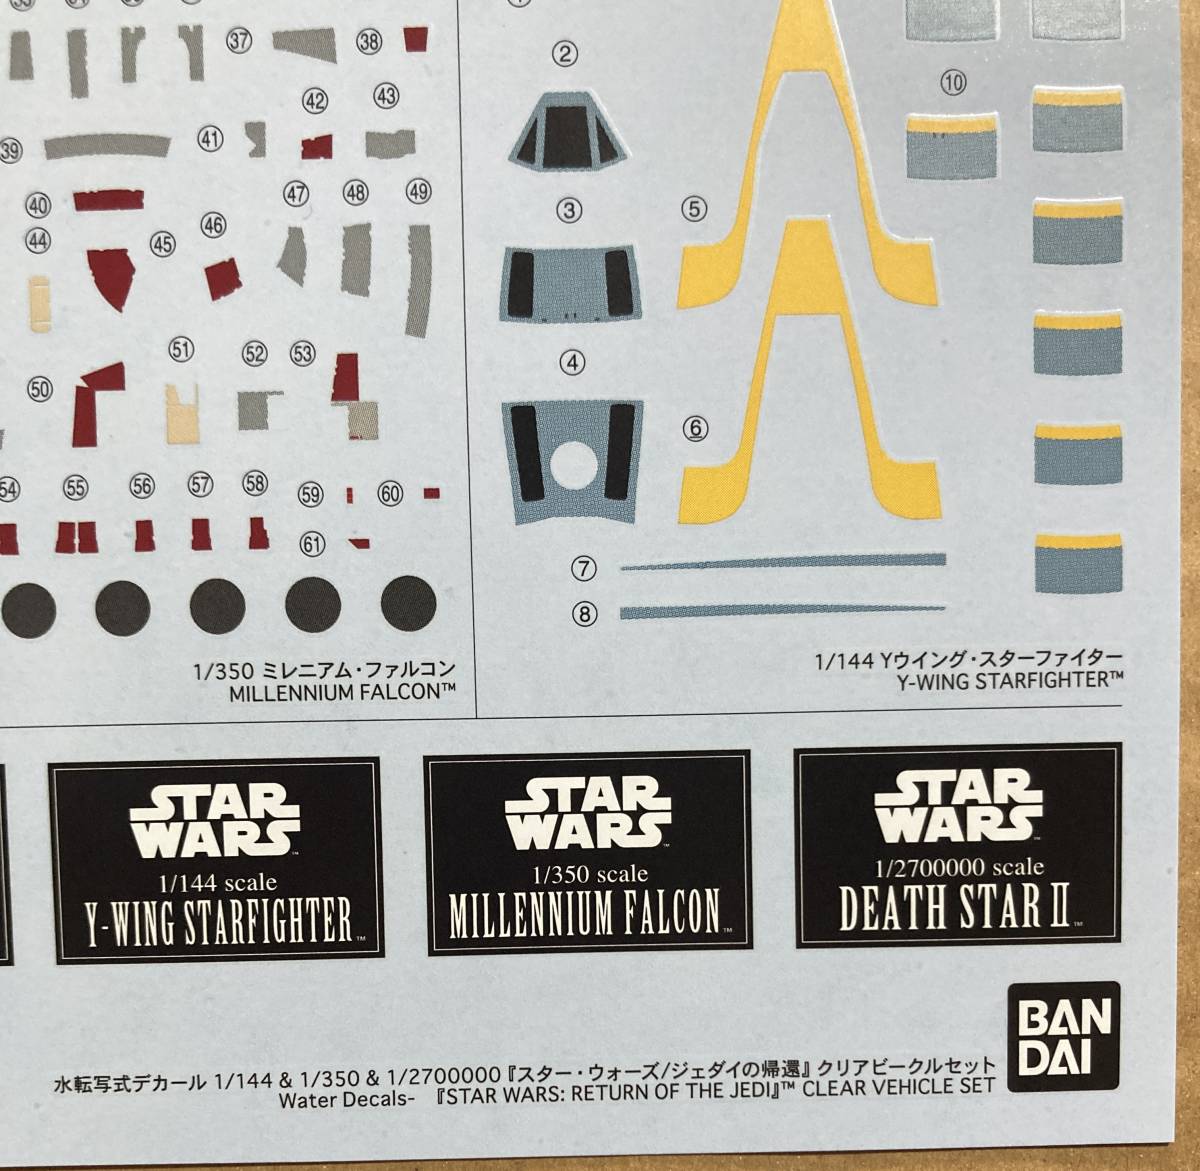  water transcription type decal 1/144&1/350&1/2700000[ Star * War z/ Jedi. ..] clear vehicle set ( X Wing Y Wing * including carriage *